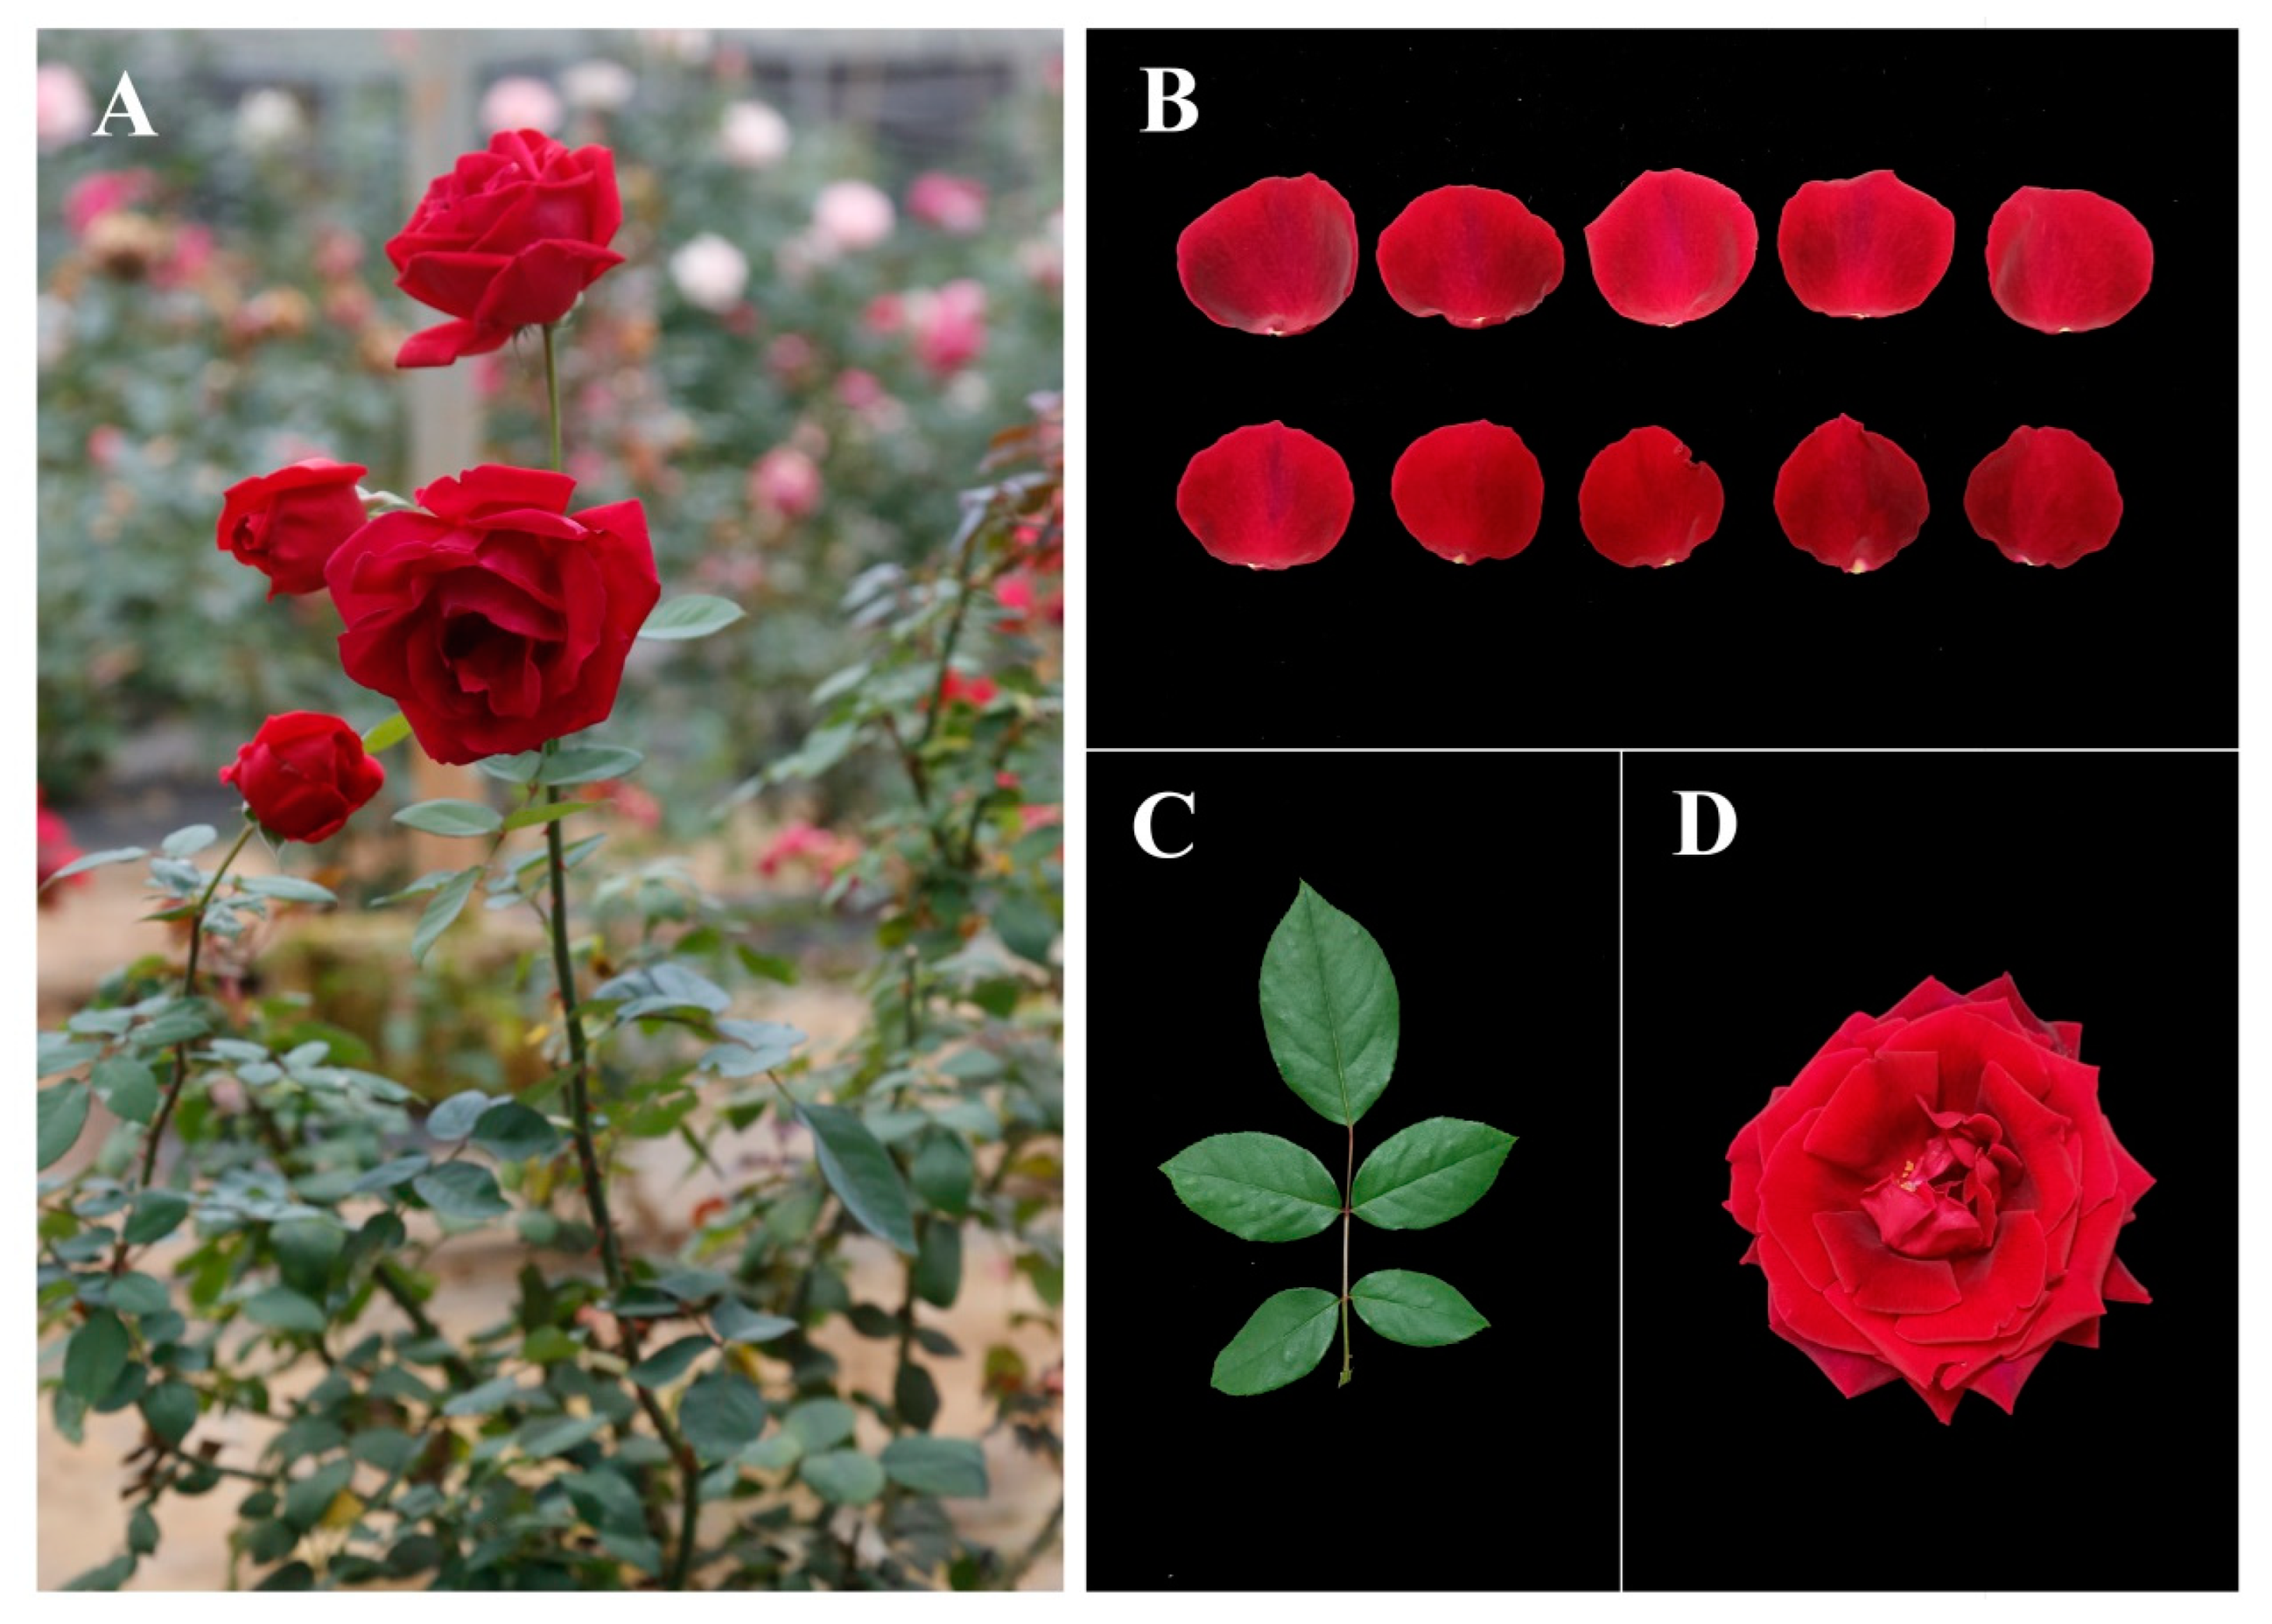 Genes | Free Full-Text | Loss of Rose Fragrance under Chilling 